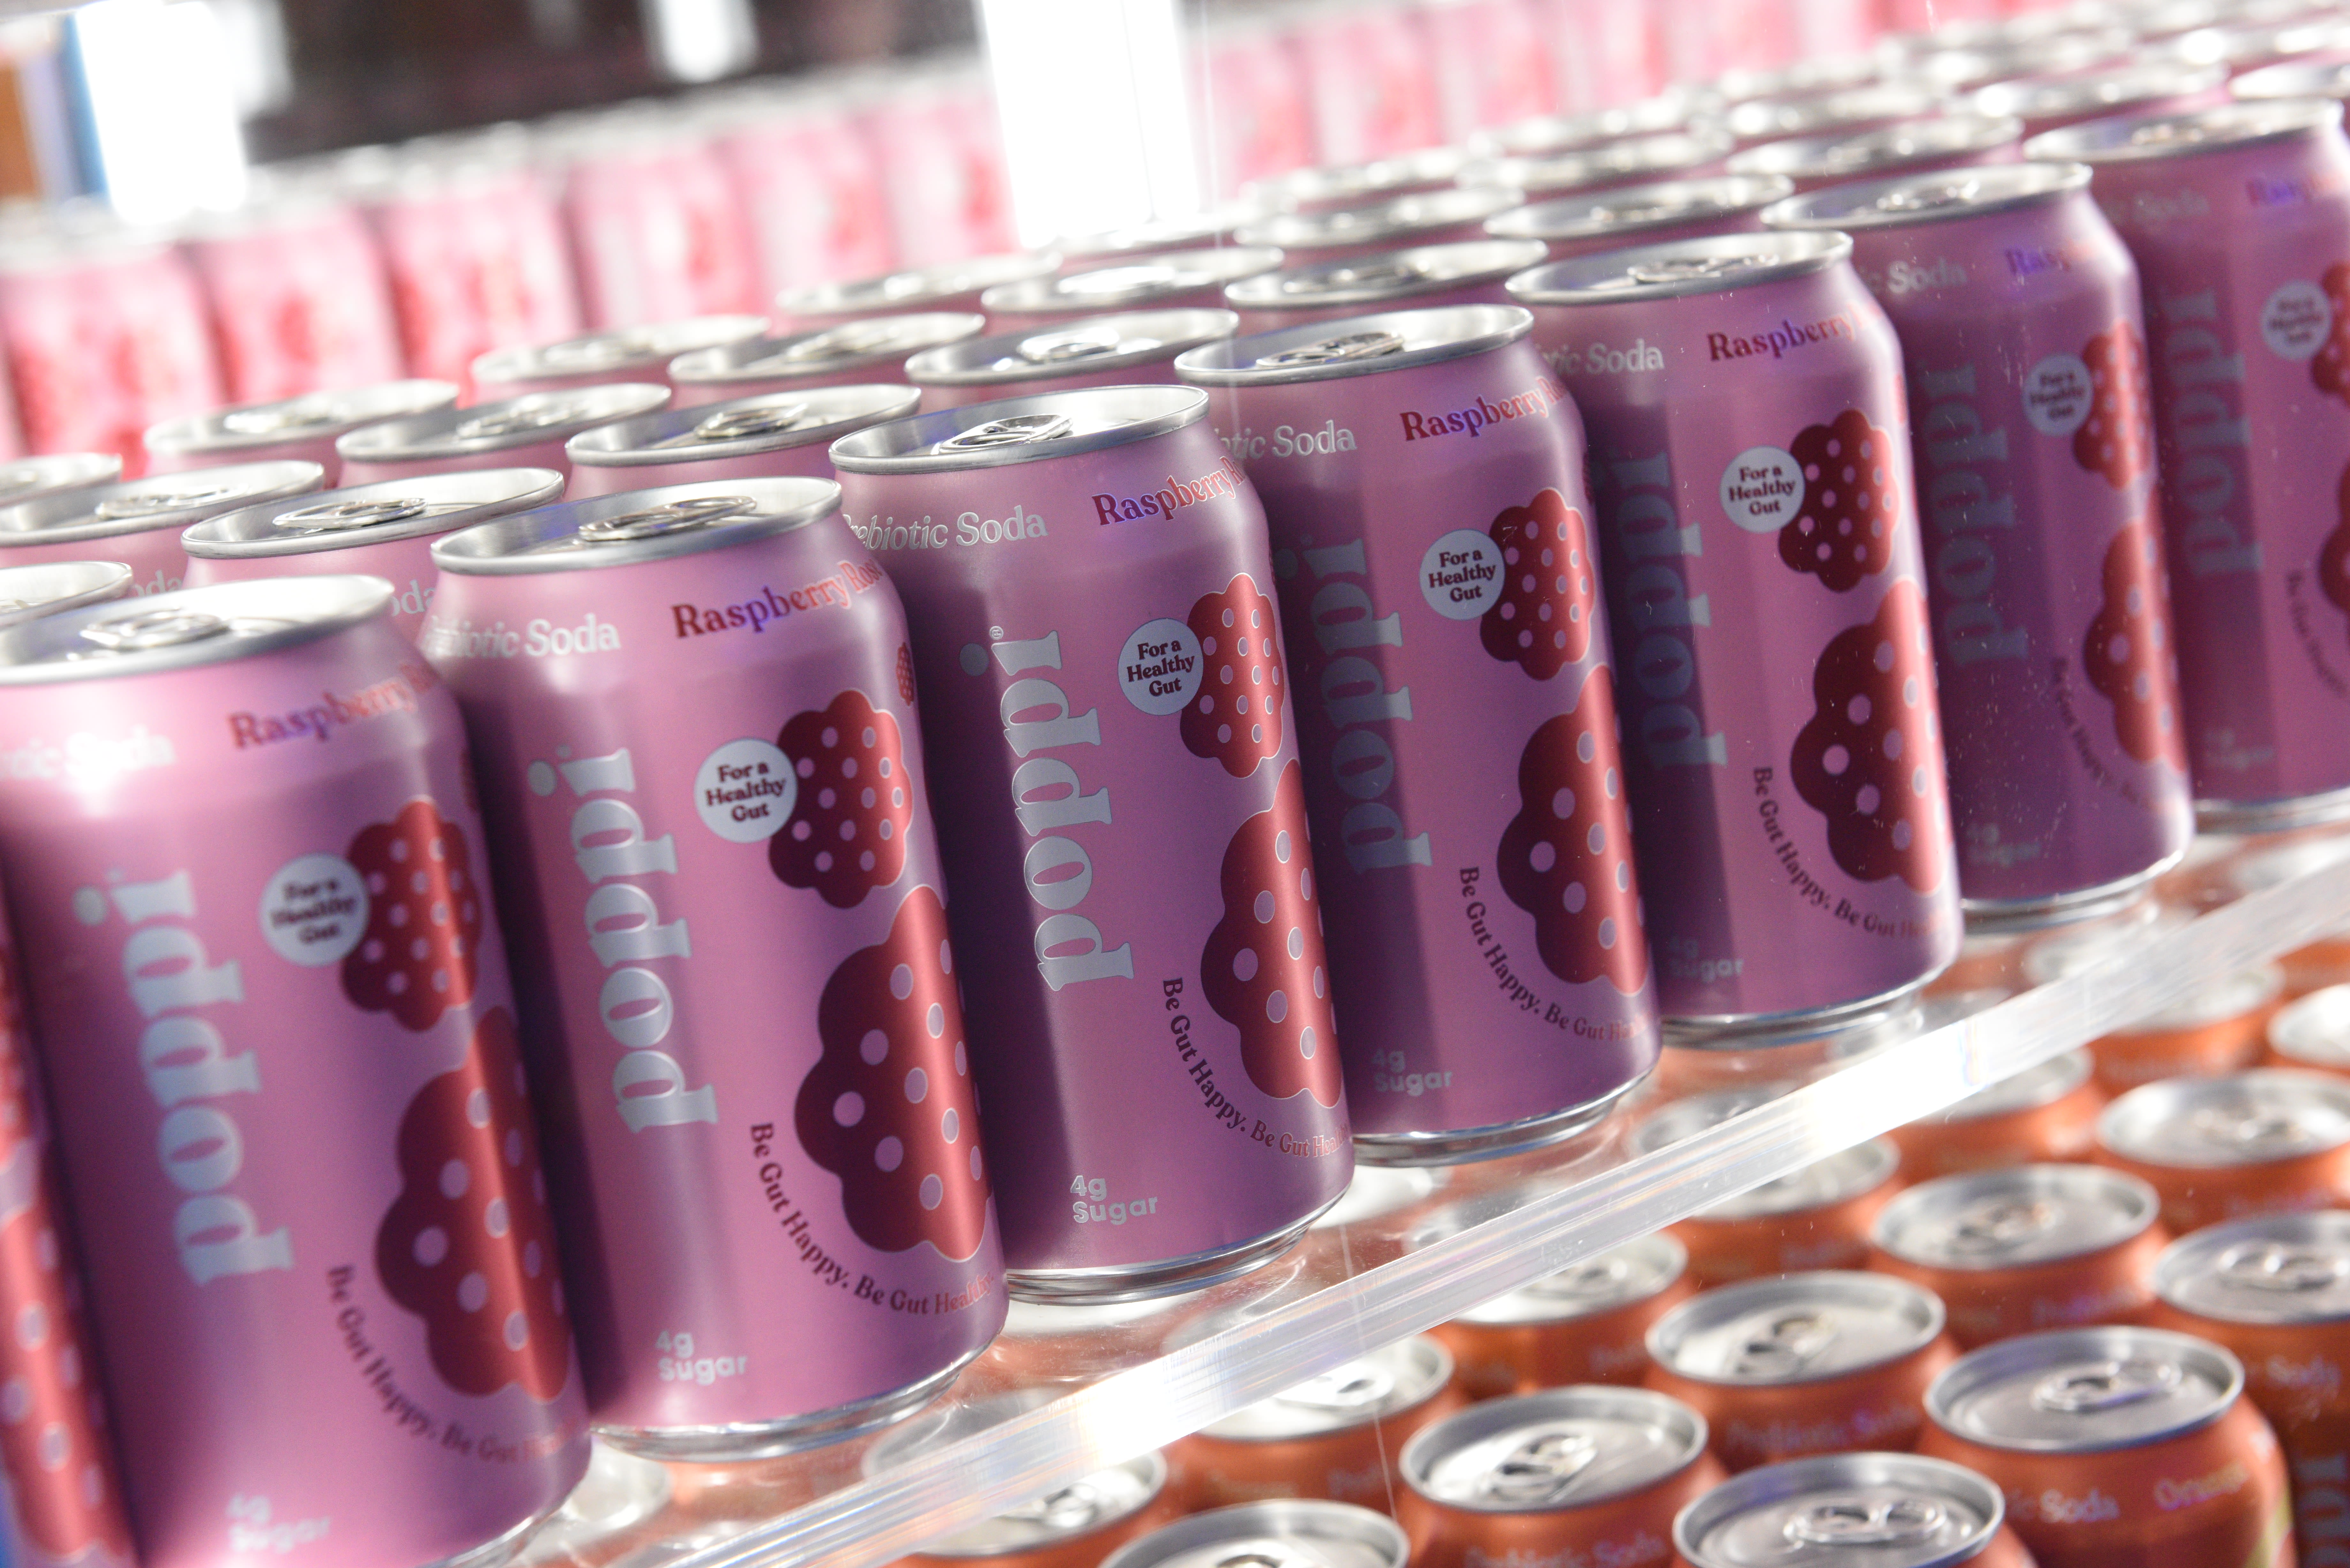 Poppi is accused of making misleading health claims in a new lawsuit. Here's what experts say about prebiotic soda.